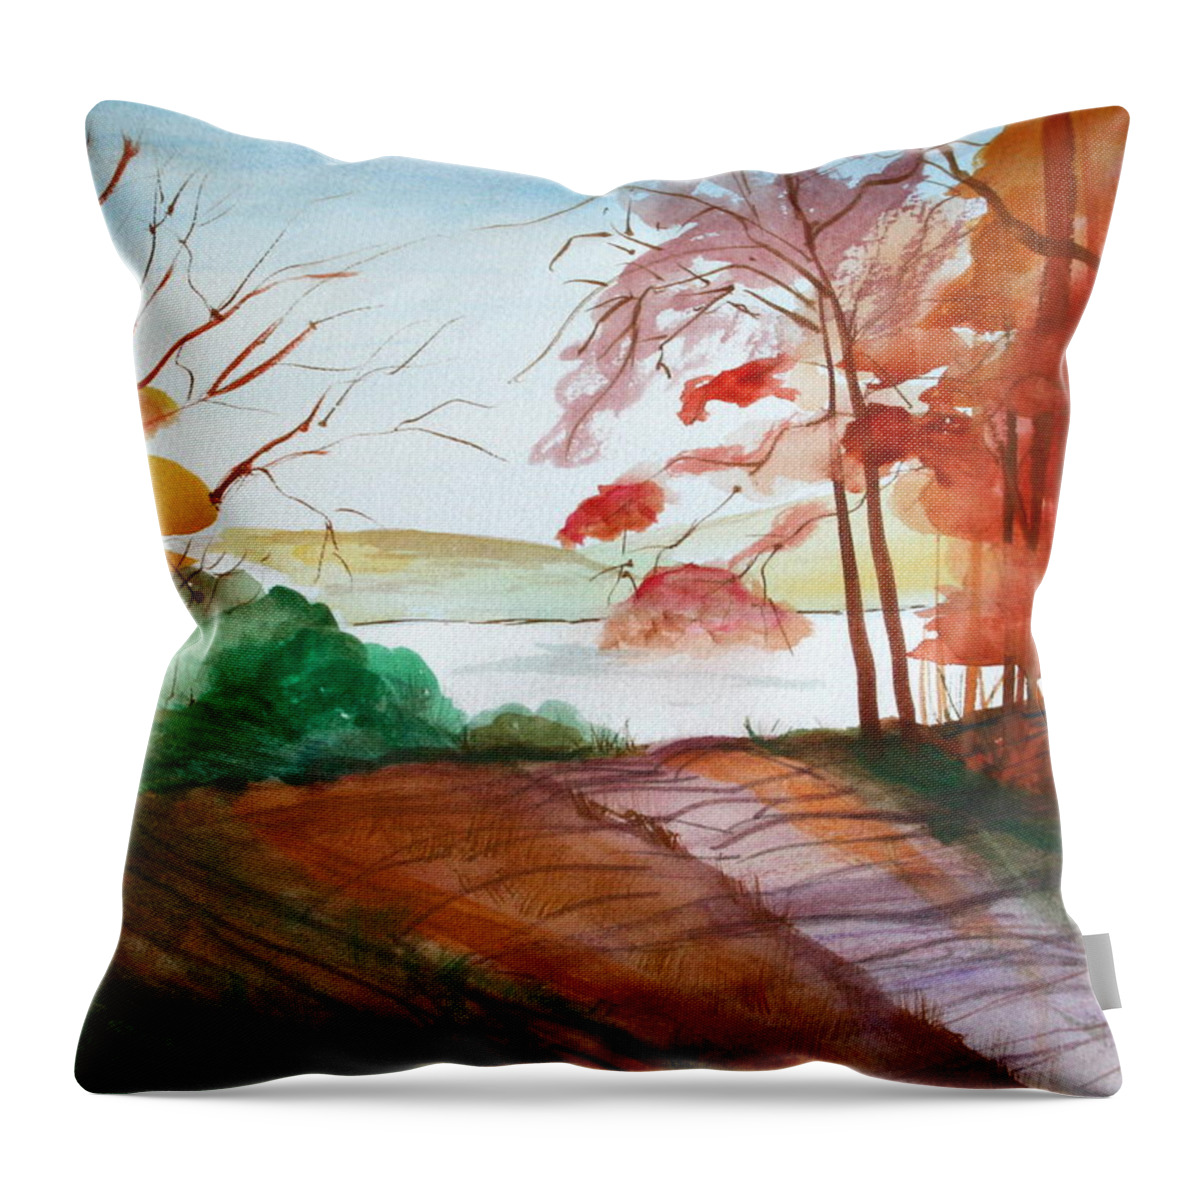 Landscape Throw Pillow featuring the painting The Lake Road by Julie Lueders 